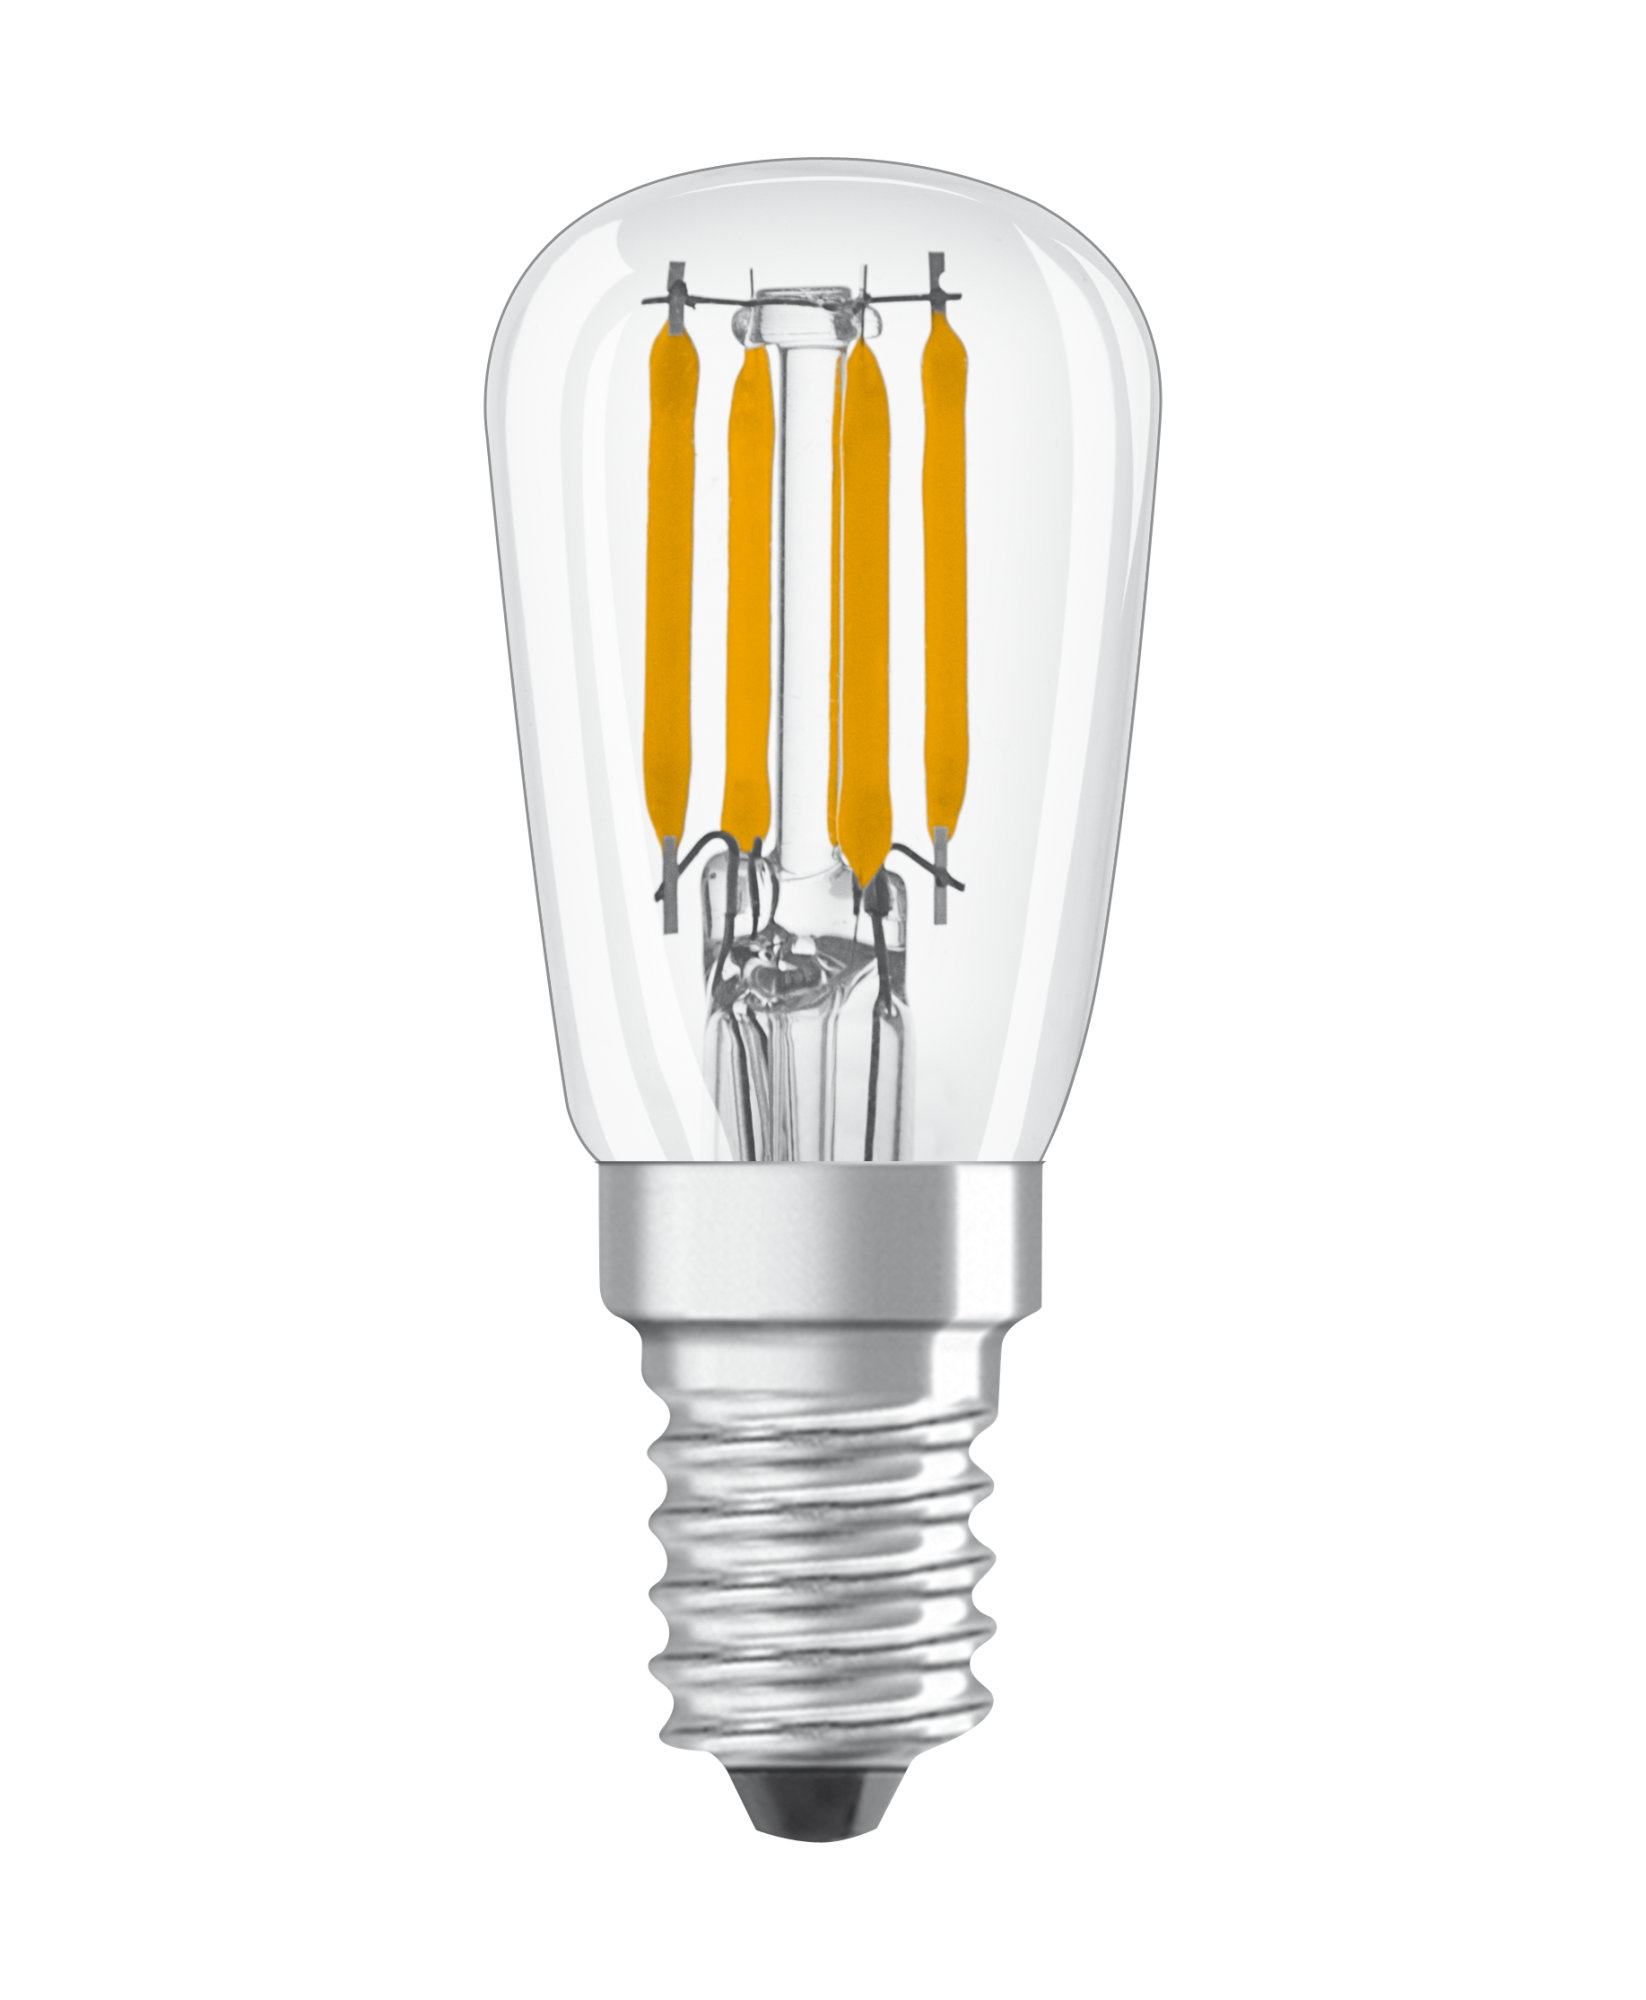 Osram LED STAR SPECIAL T26 25 clear non-dim 2.8W 865 E14 250lm 6500K